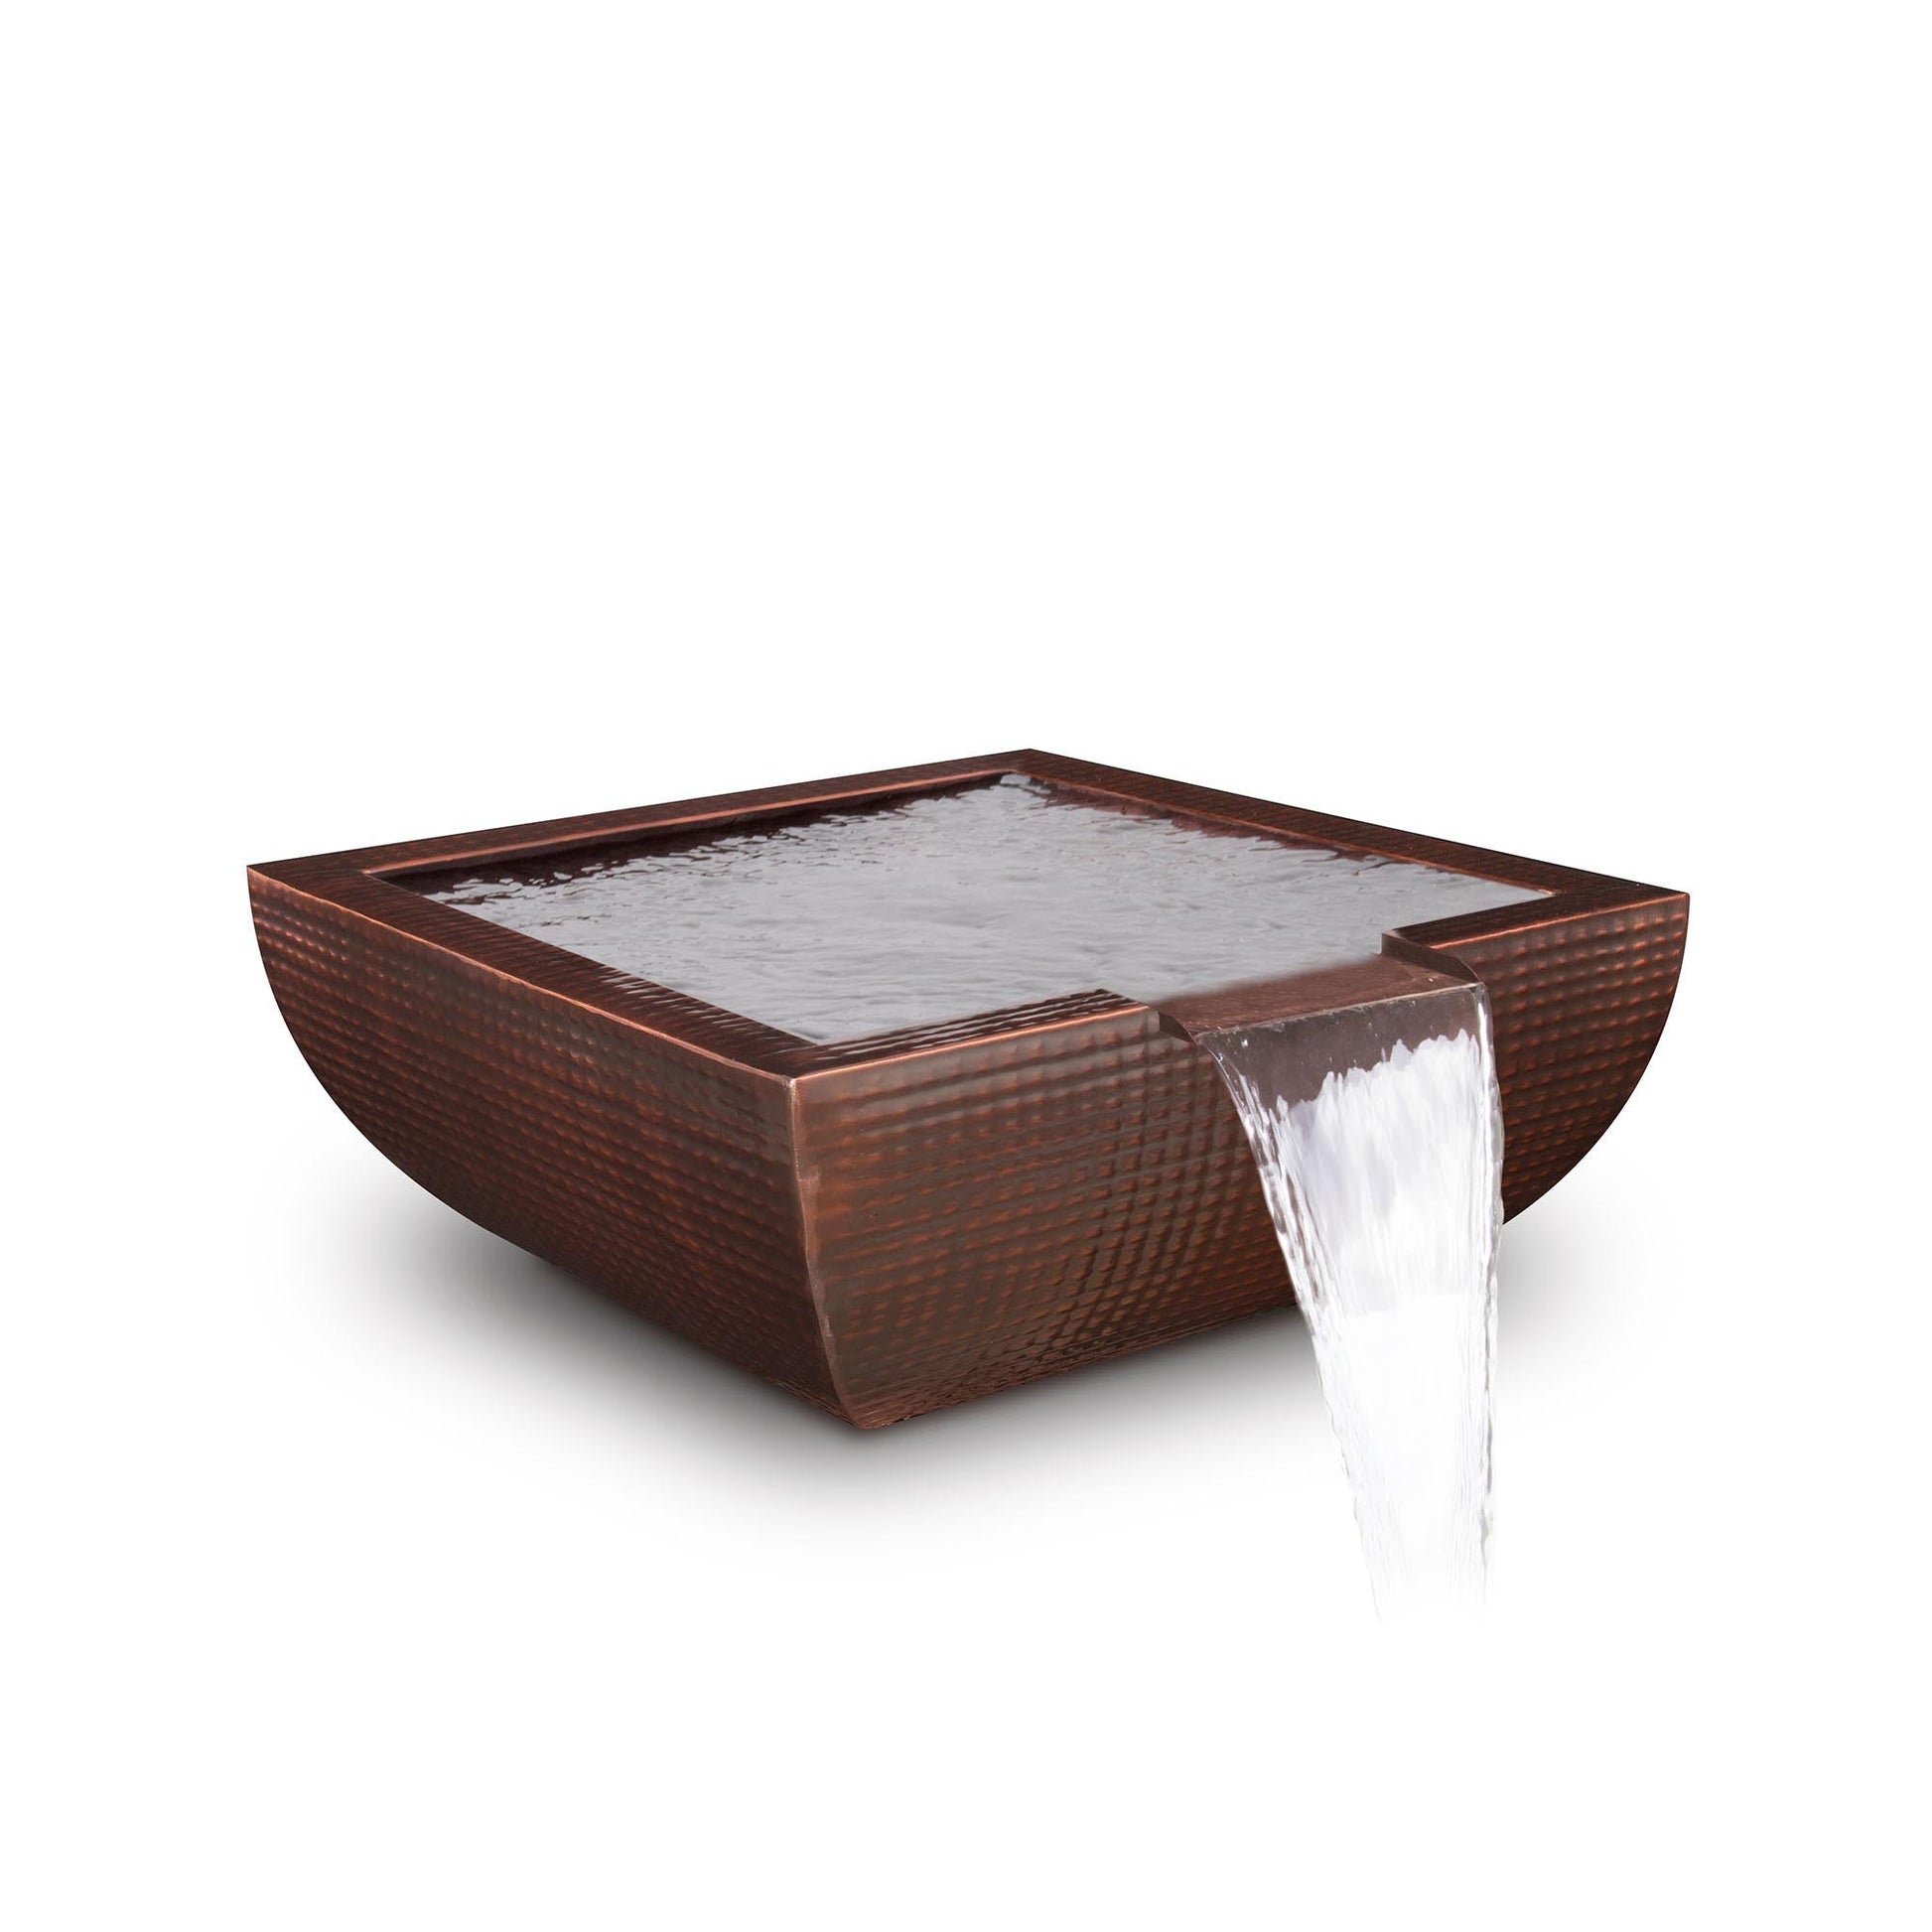 The Outdoor Plus Square Avalon 36" Pewter Powder Coated Water Bowl